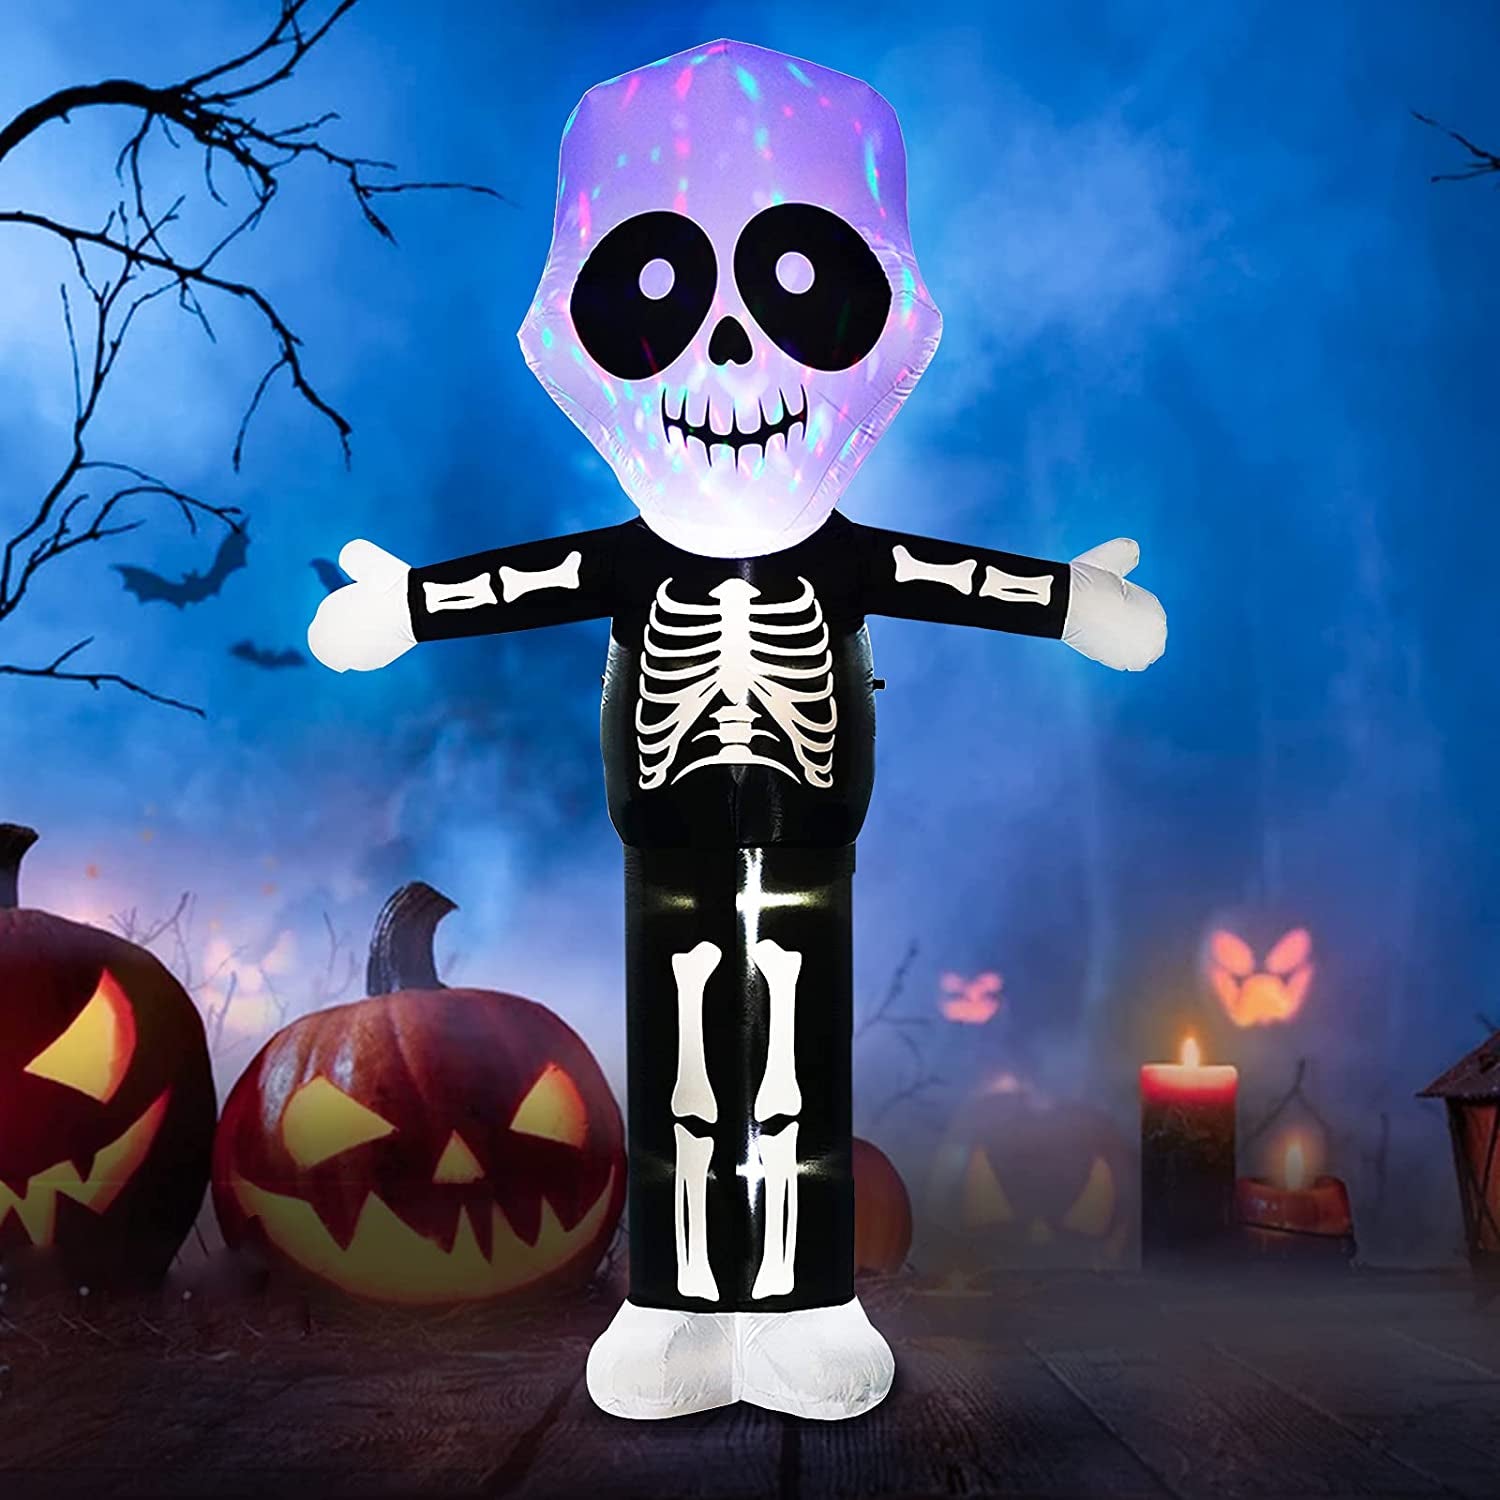 TOROKOM, TOROKOM 8 FT Halloween Inflatables Decoration Large Grim Reaper Skull Ghost Halloween Blow up Yard Decoration with LED Light Built-In for Home Party Garden Yard Lawn Indoor Outdoor Decor